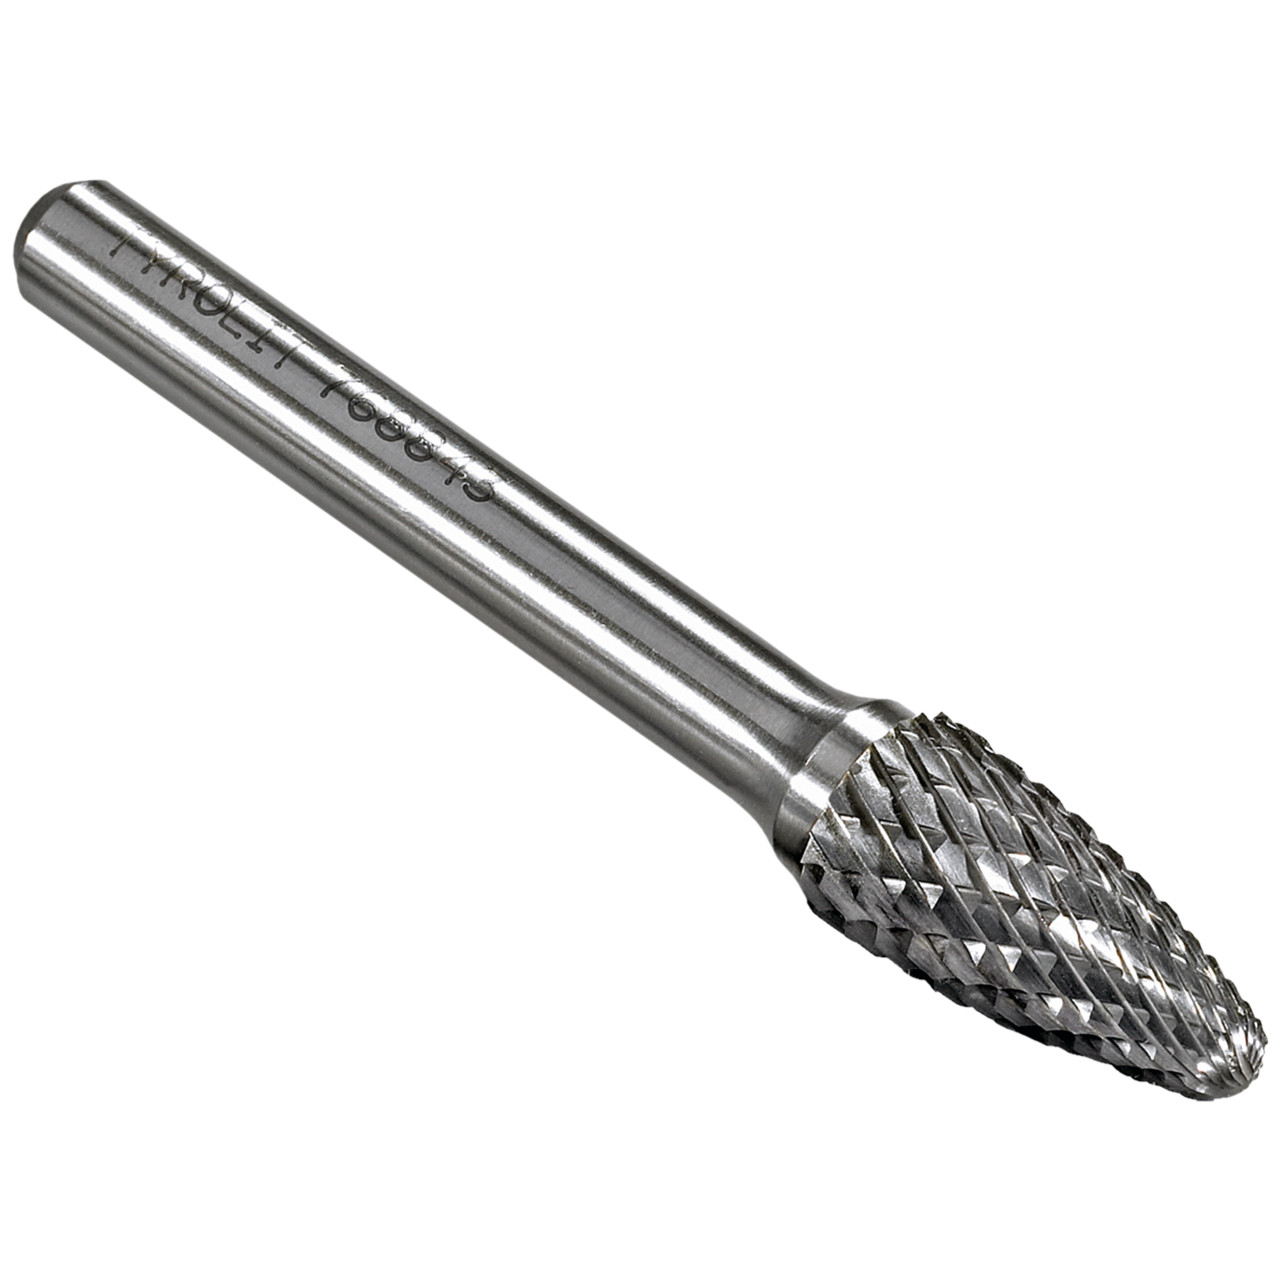 TYROLIT carbide end mill DxT-SxL 6x13-3x45 For cast iron, steel and stainless steel, shape: 52RBF - tree, Art. 766156